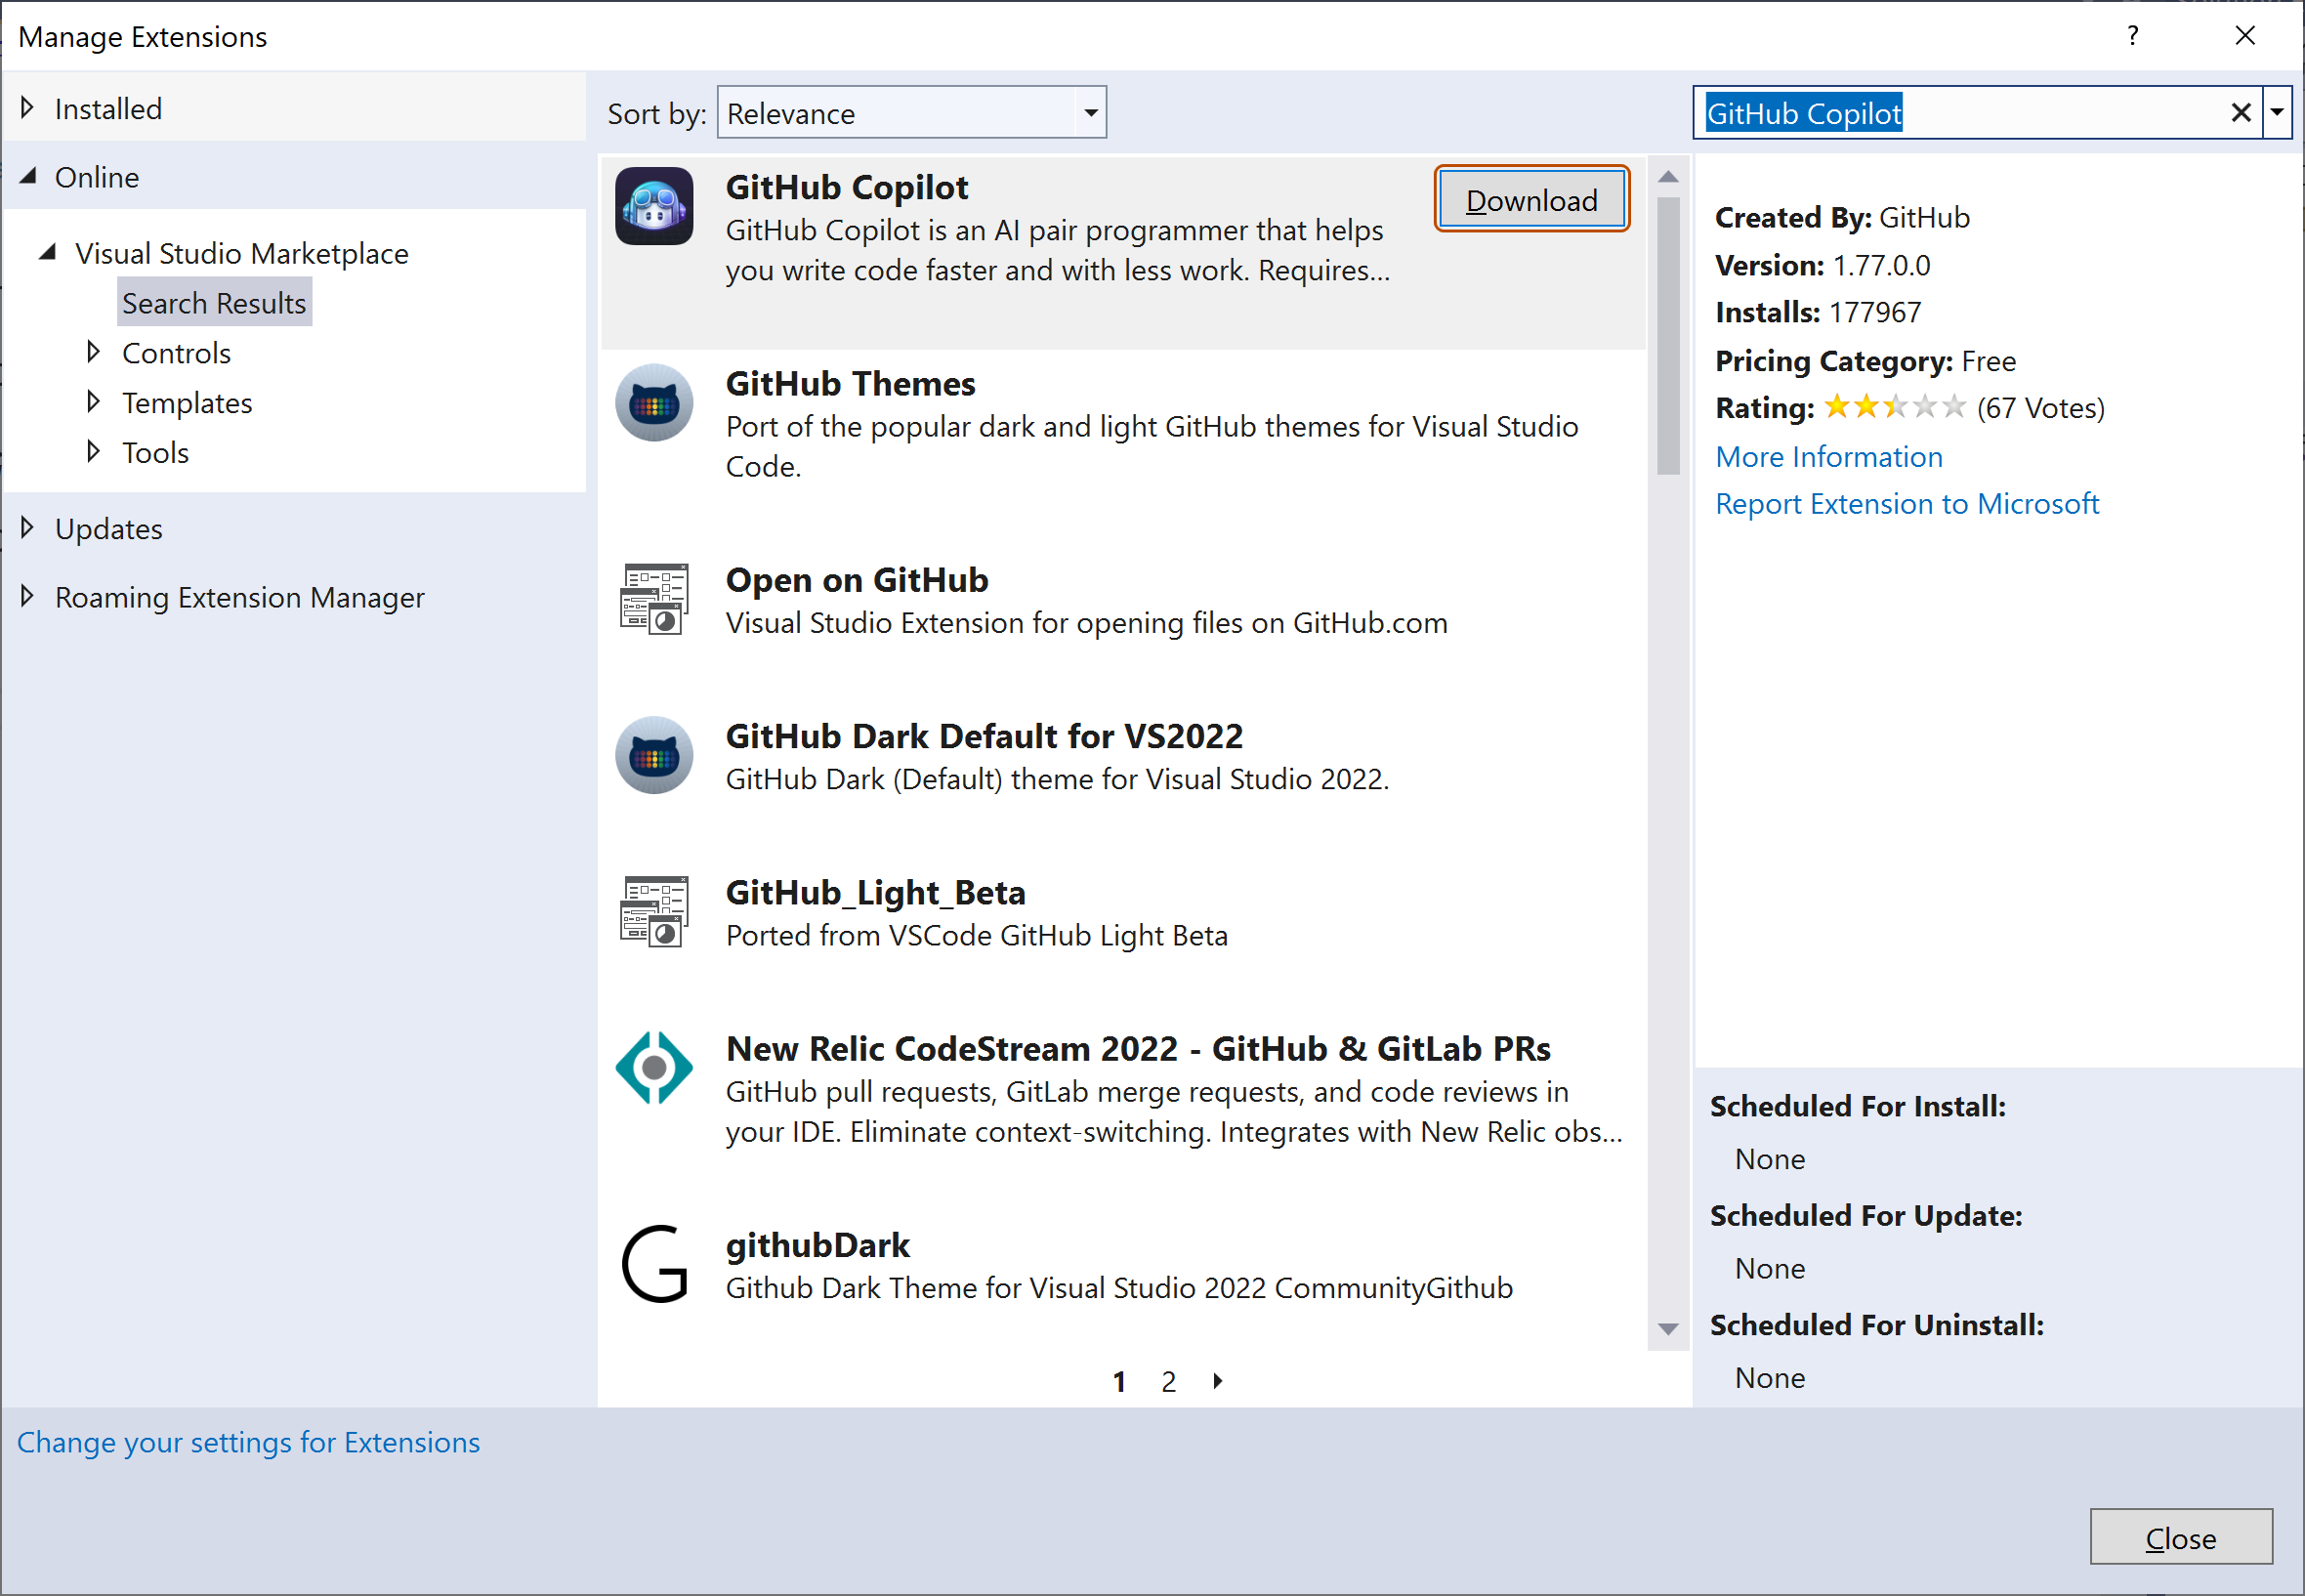 Screenshot of GitHub Copilot extension for Visual Studio with the download button emphasized.